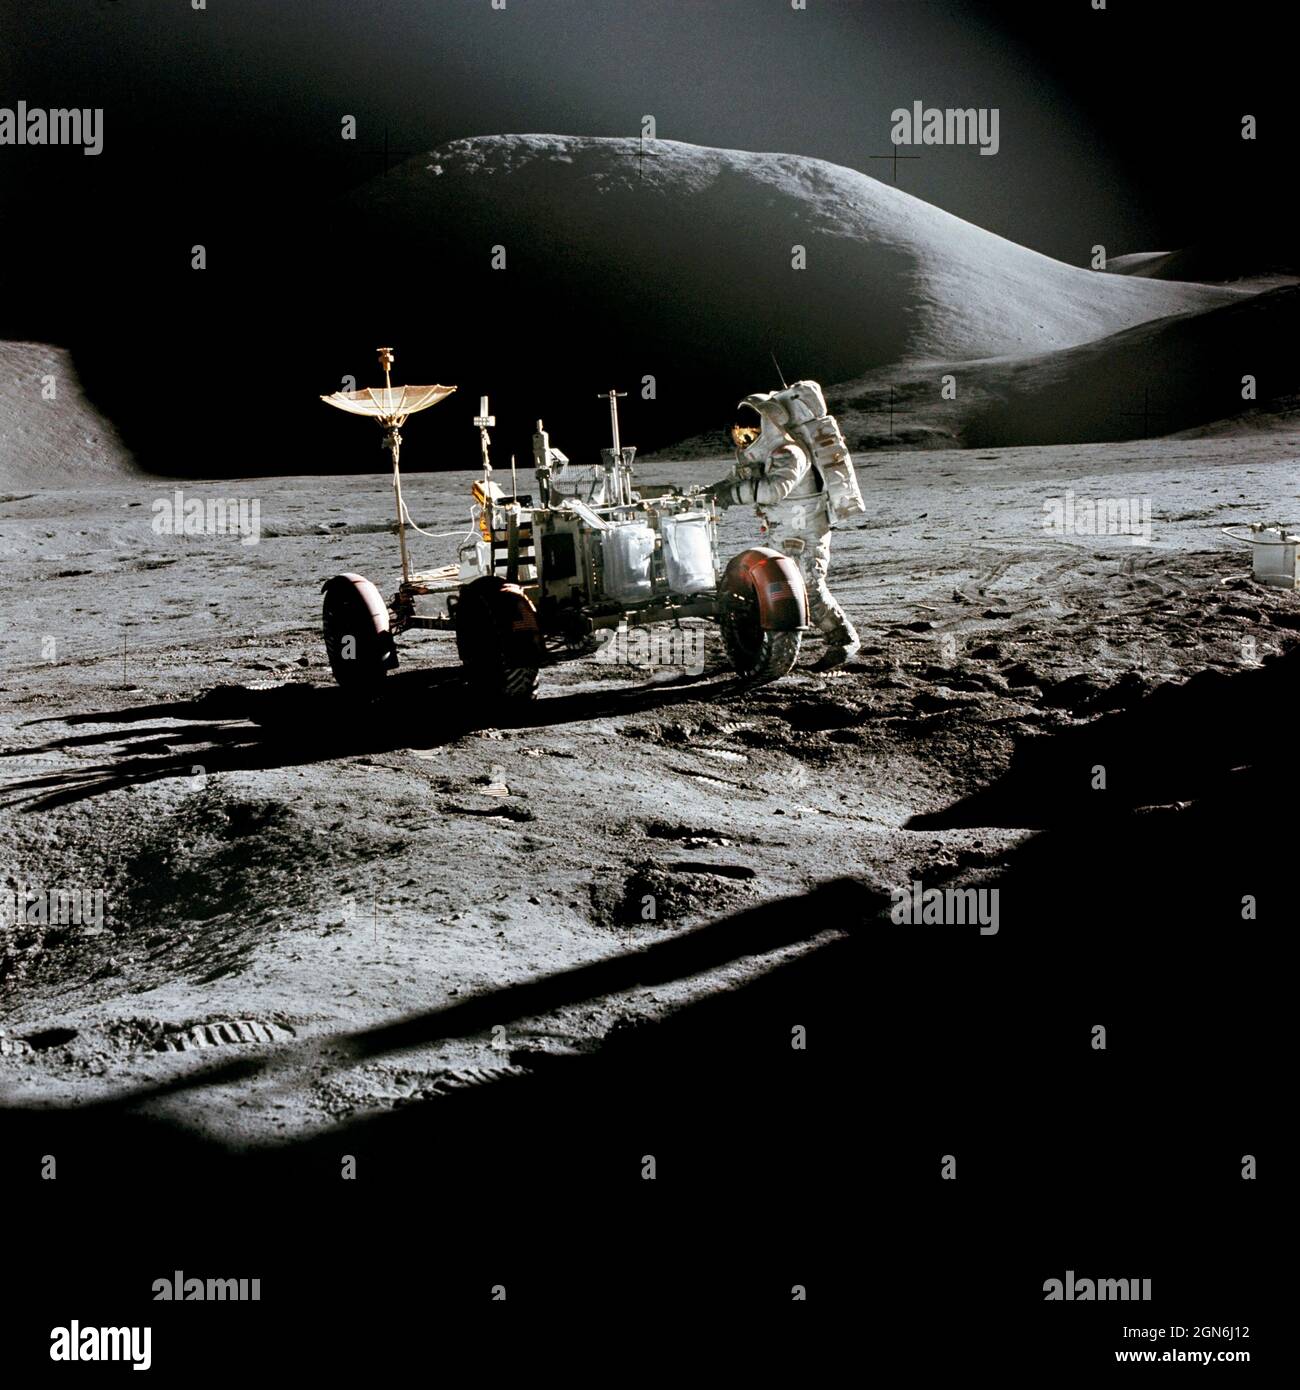 (31 July 1971) --- Astronaut James B. Irwin, lunar module pilot, works at the Lunar Roving Vehicle during the first Apollo 15 lunar surface extravehicular activity (EVA) at the Hadley-Apennine landing site. The shadow of the Lunar Module 'Falcon' is in the foreground. This view is looking northeast, with Mount Hadley in the background. This photograph was taken by astronaut David R. Scott, commander. Stock Photo